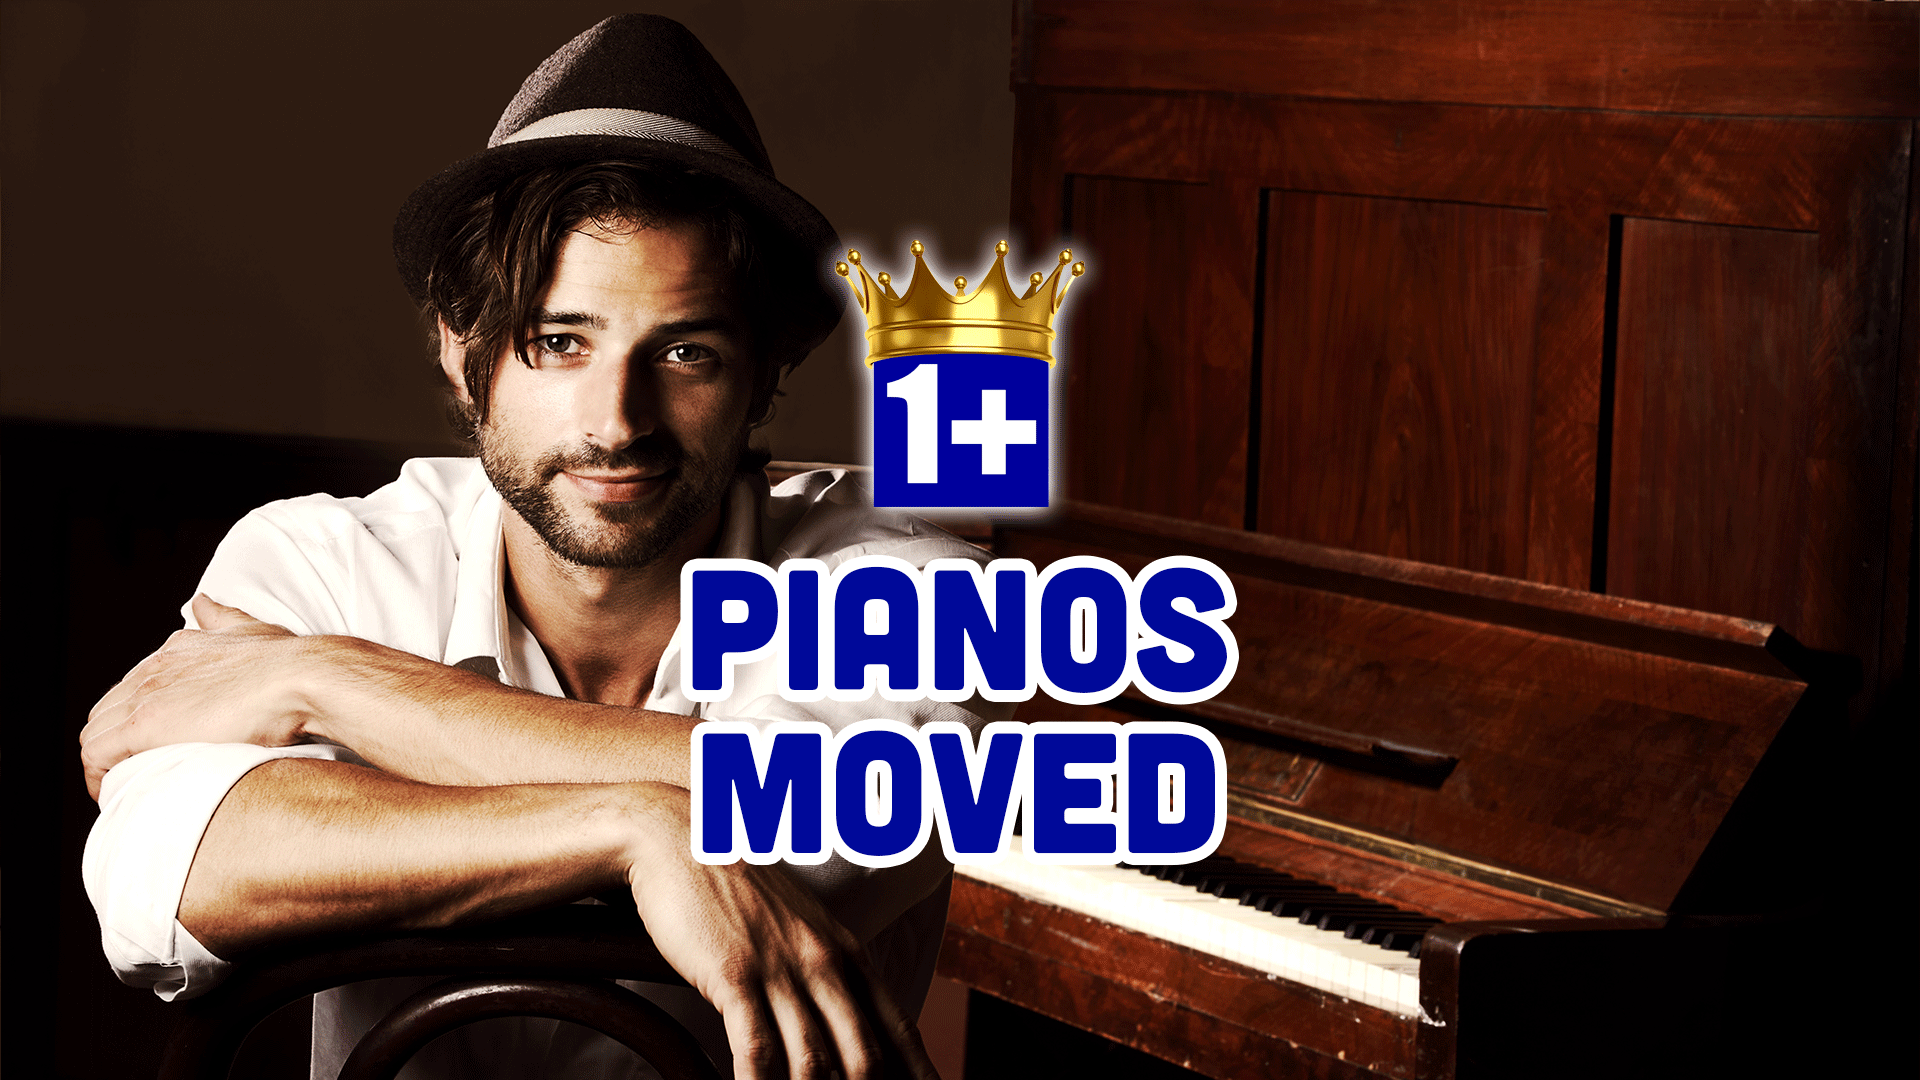 Pianos-Moved In Houston Texas